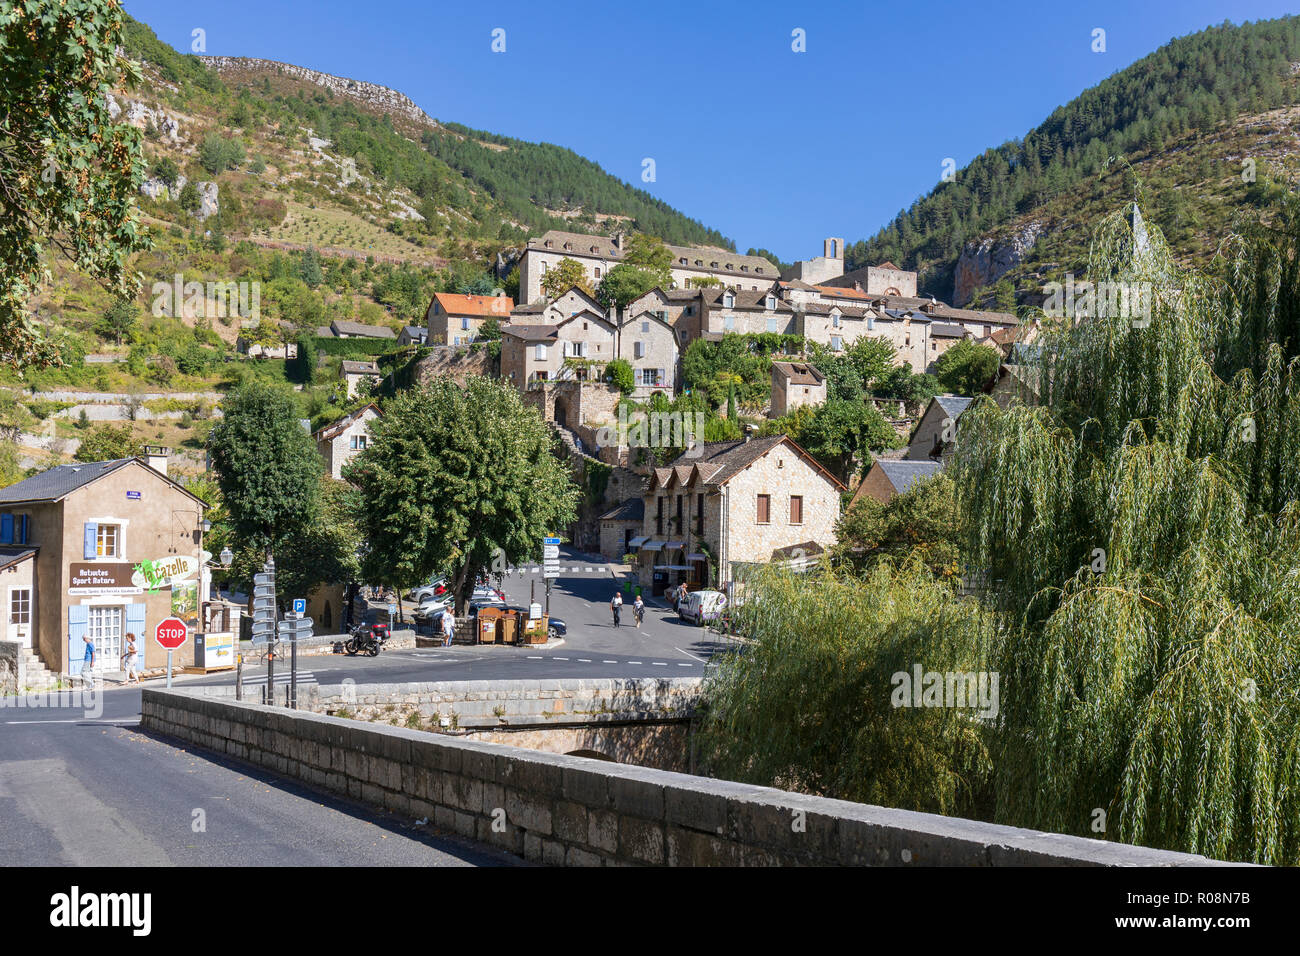 Sainte Enimie, Gorge du Tarn, France, The town as seen from across the river Stock Photo